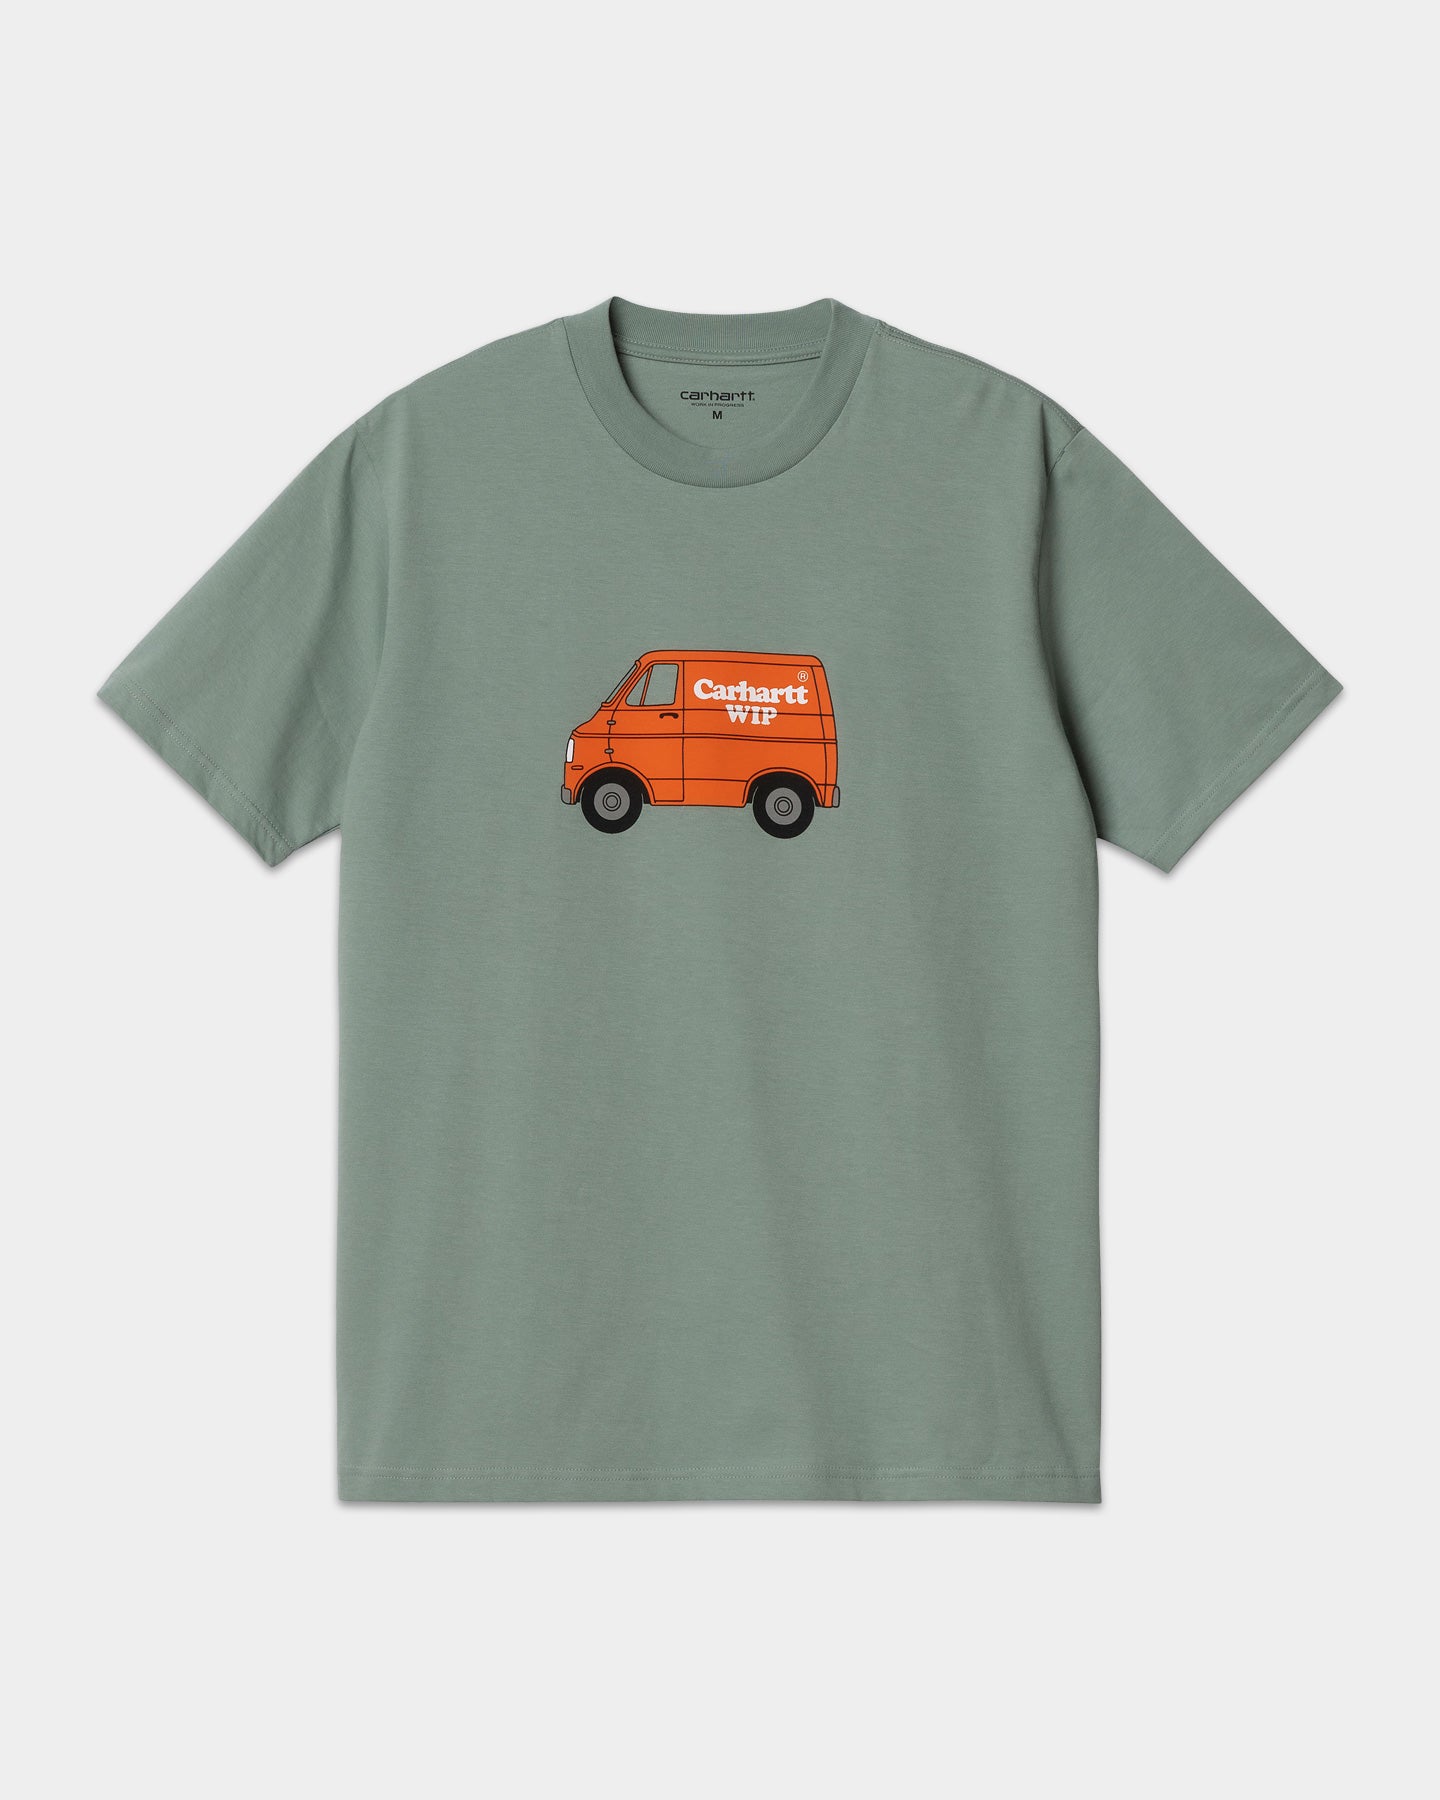 S/S MYSTERY MACHINE T-SHIRT - glassy teal